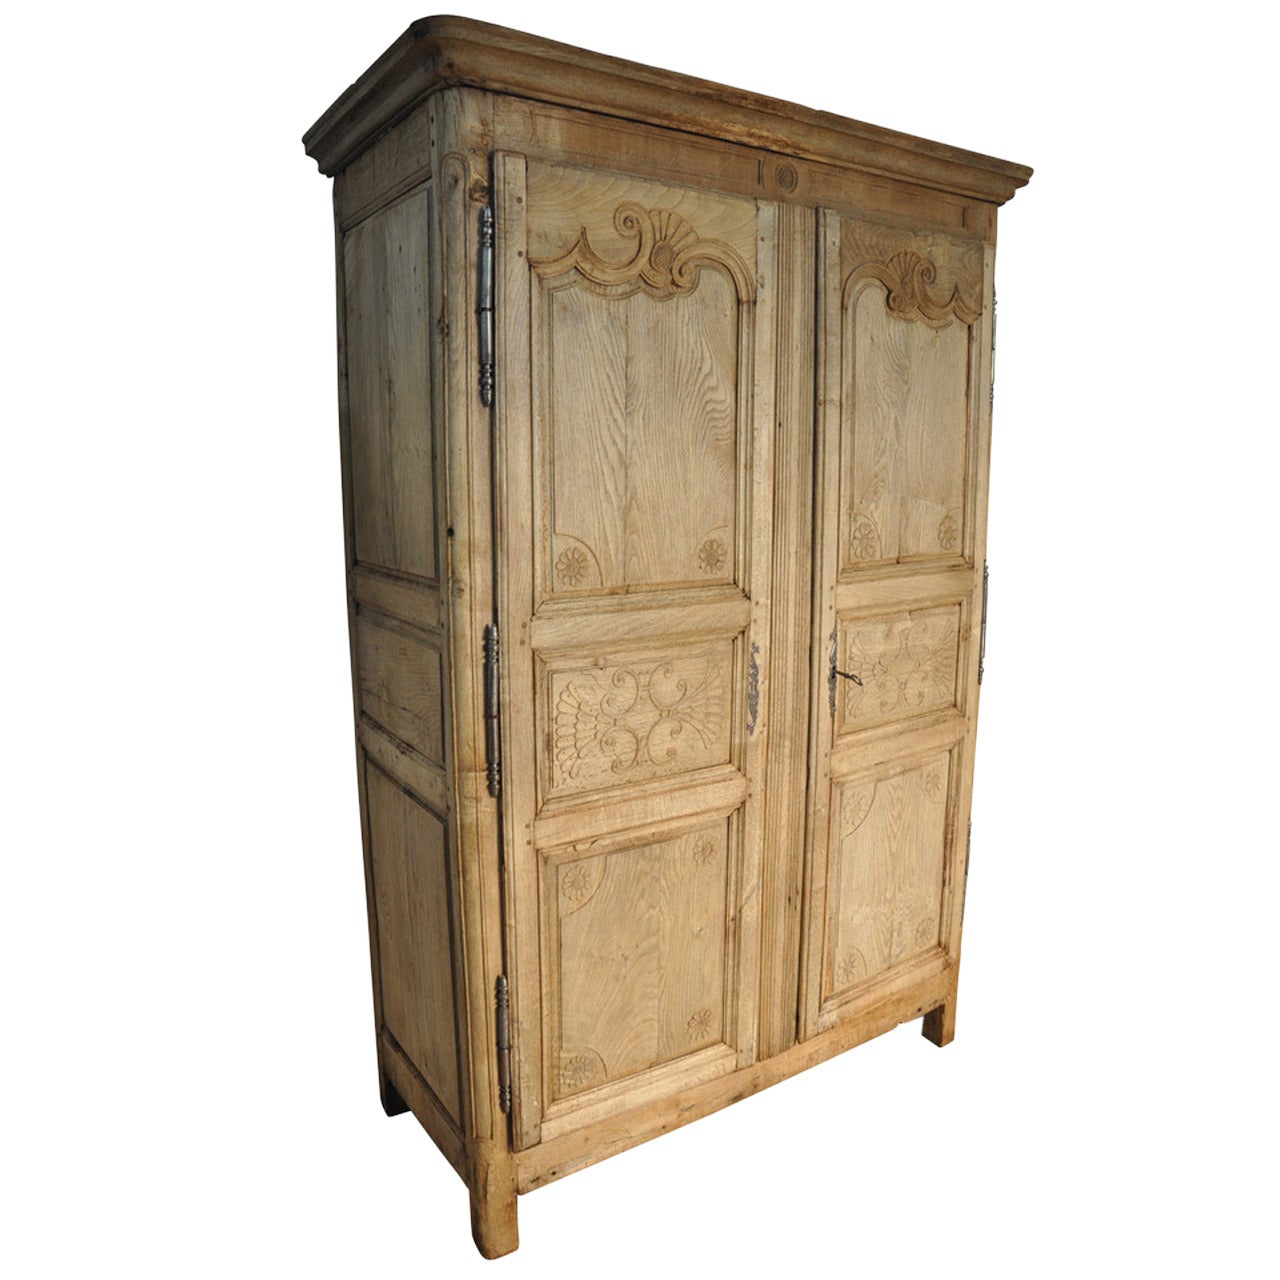 French 18th Century Louis XIV Style Armoire In Bleached Oak